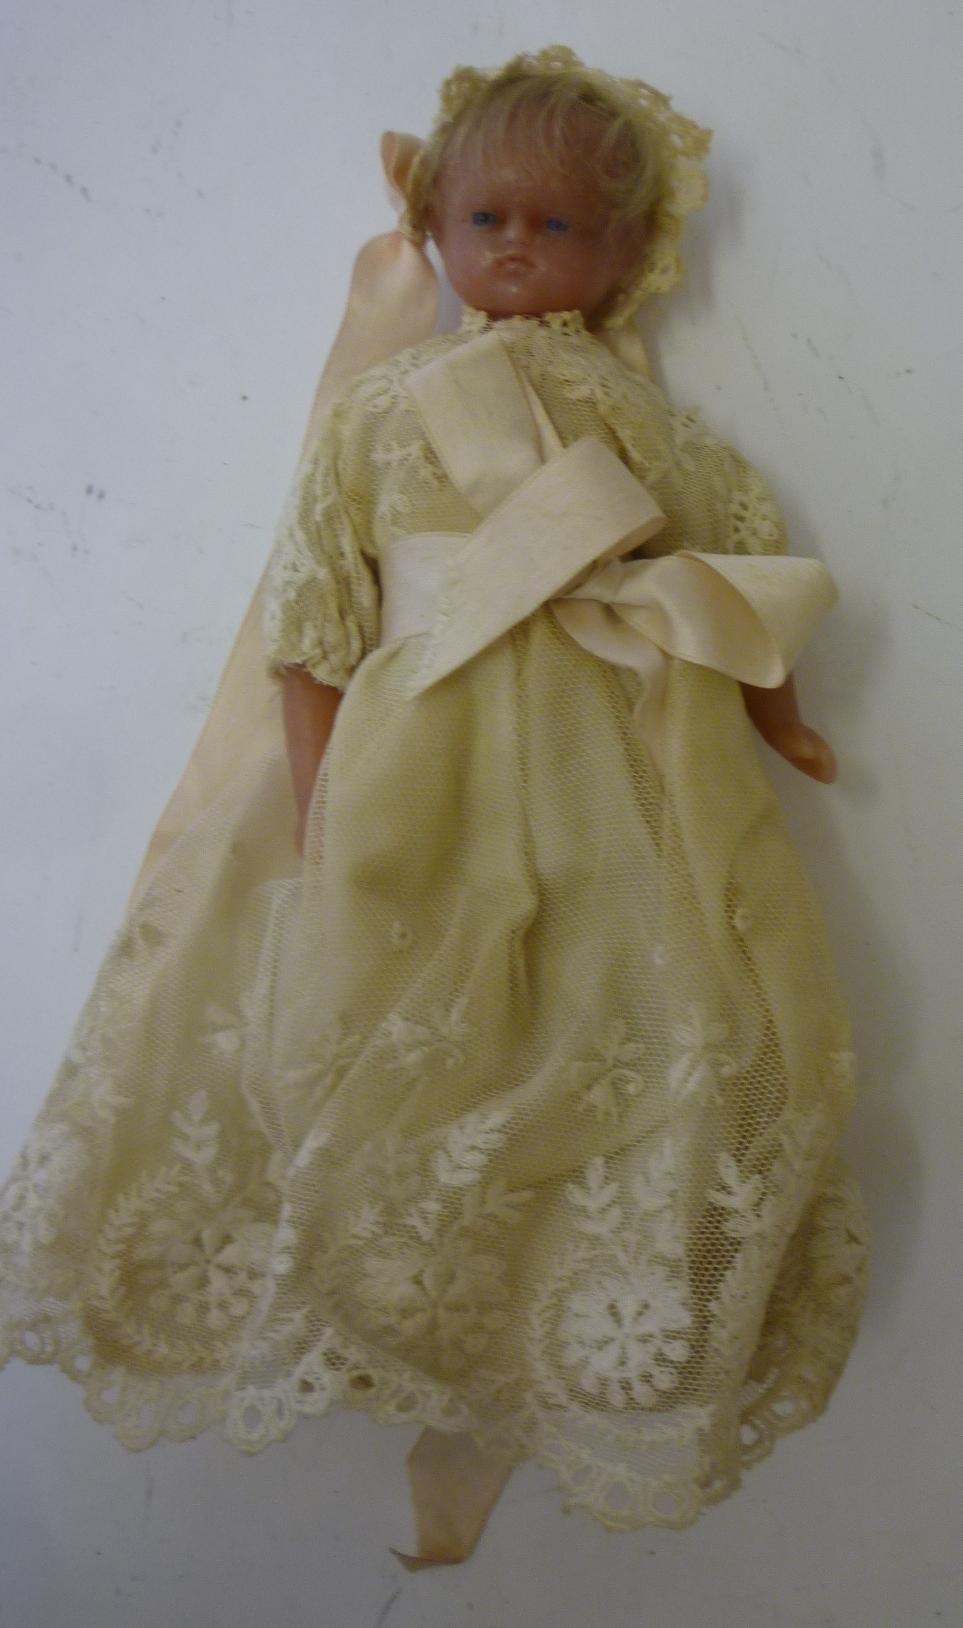 A poured wax shoulder head doll, c.1880, with inset blue glass eyes, blonde mohair wig, stuffed